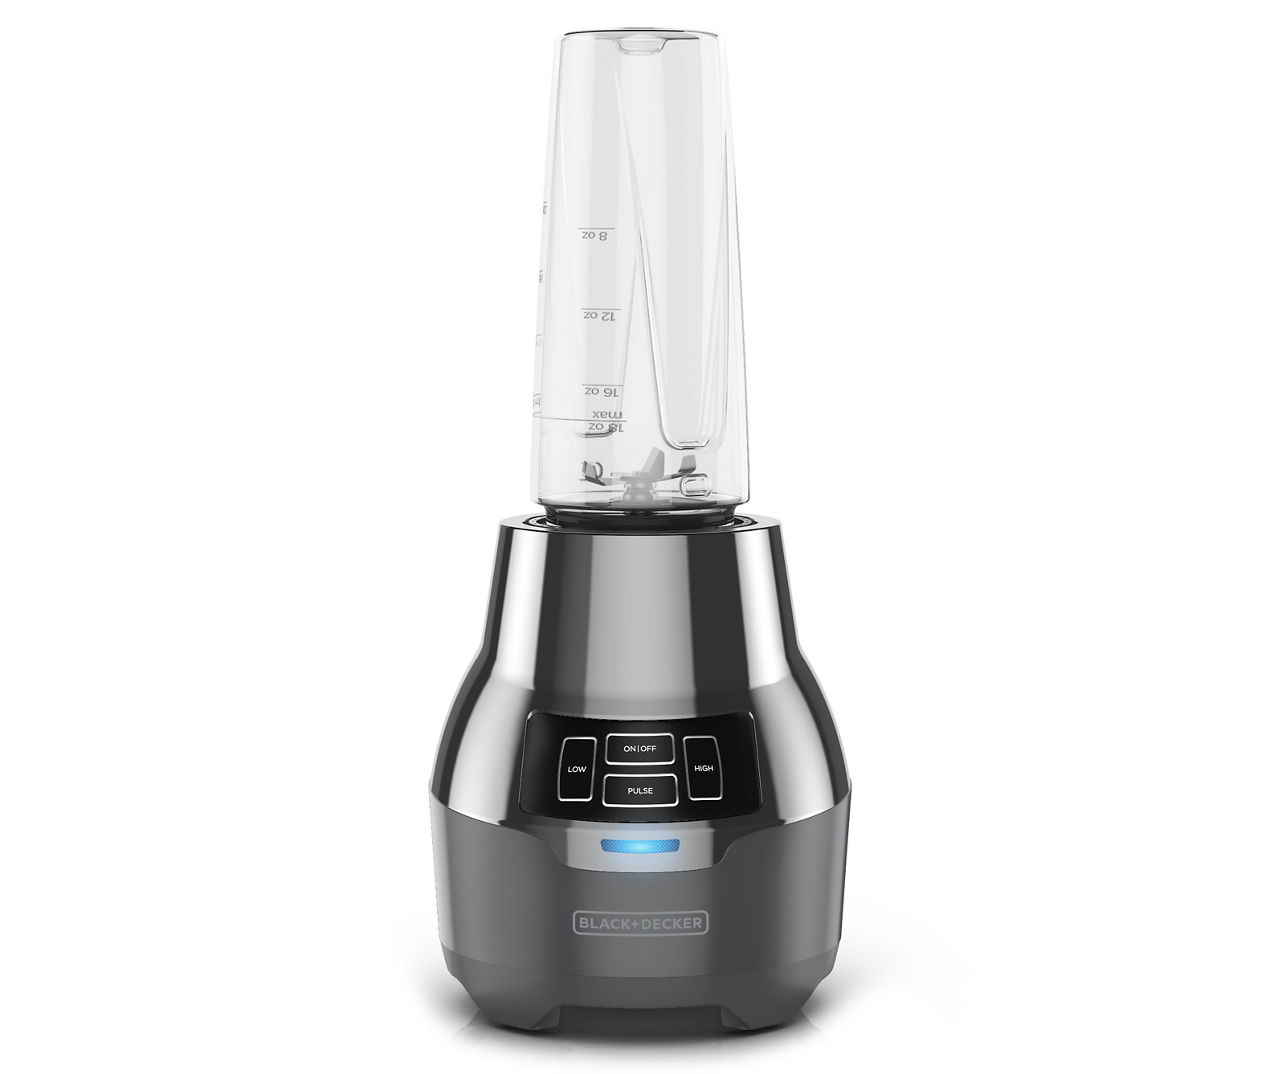 The Quiet Blender By Black & Decker - Is It Quiet & Can You Blend